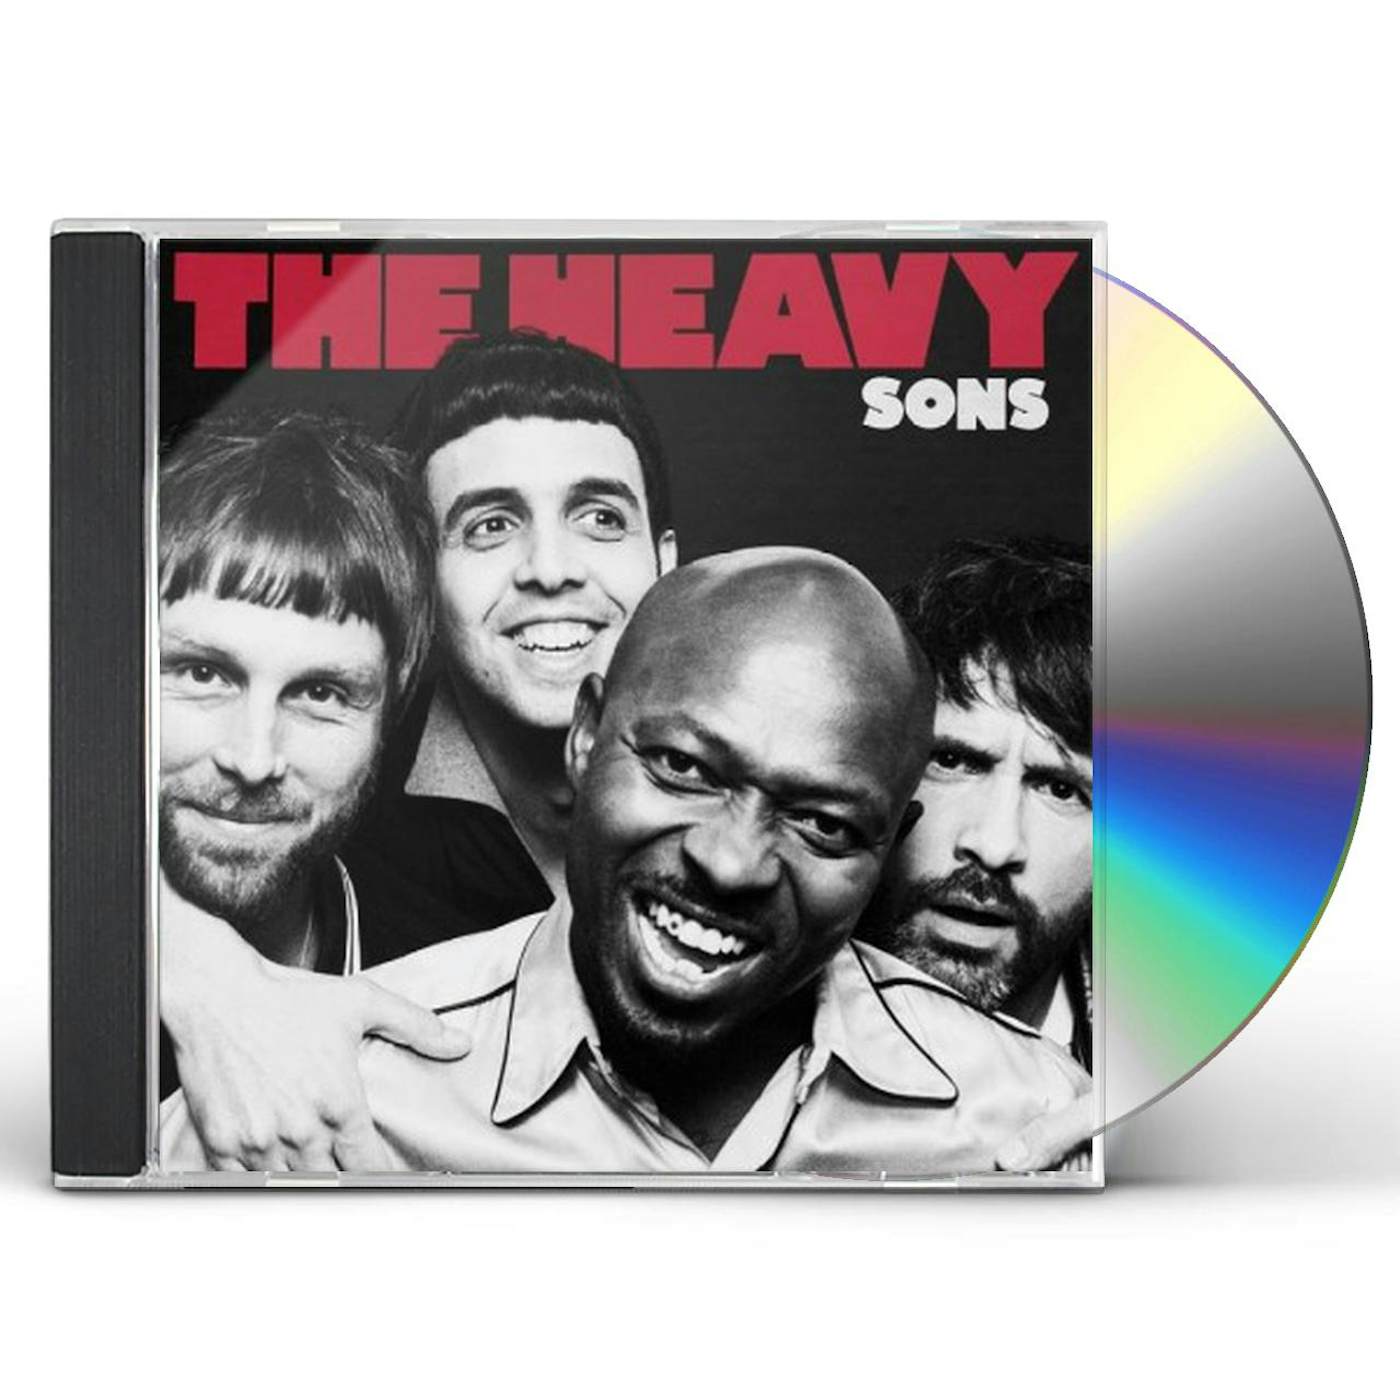 The Heavy Sons CD